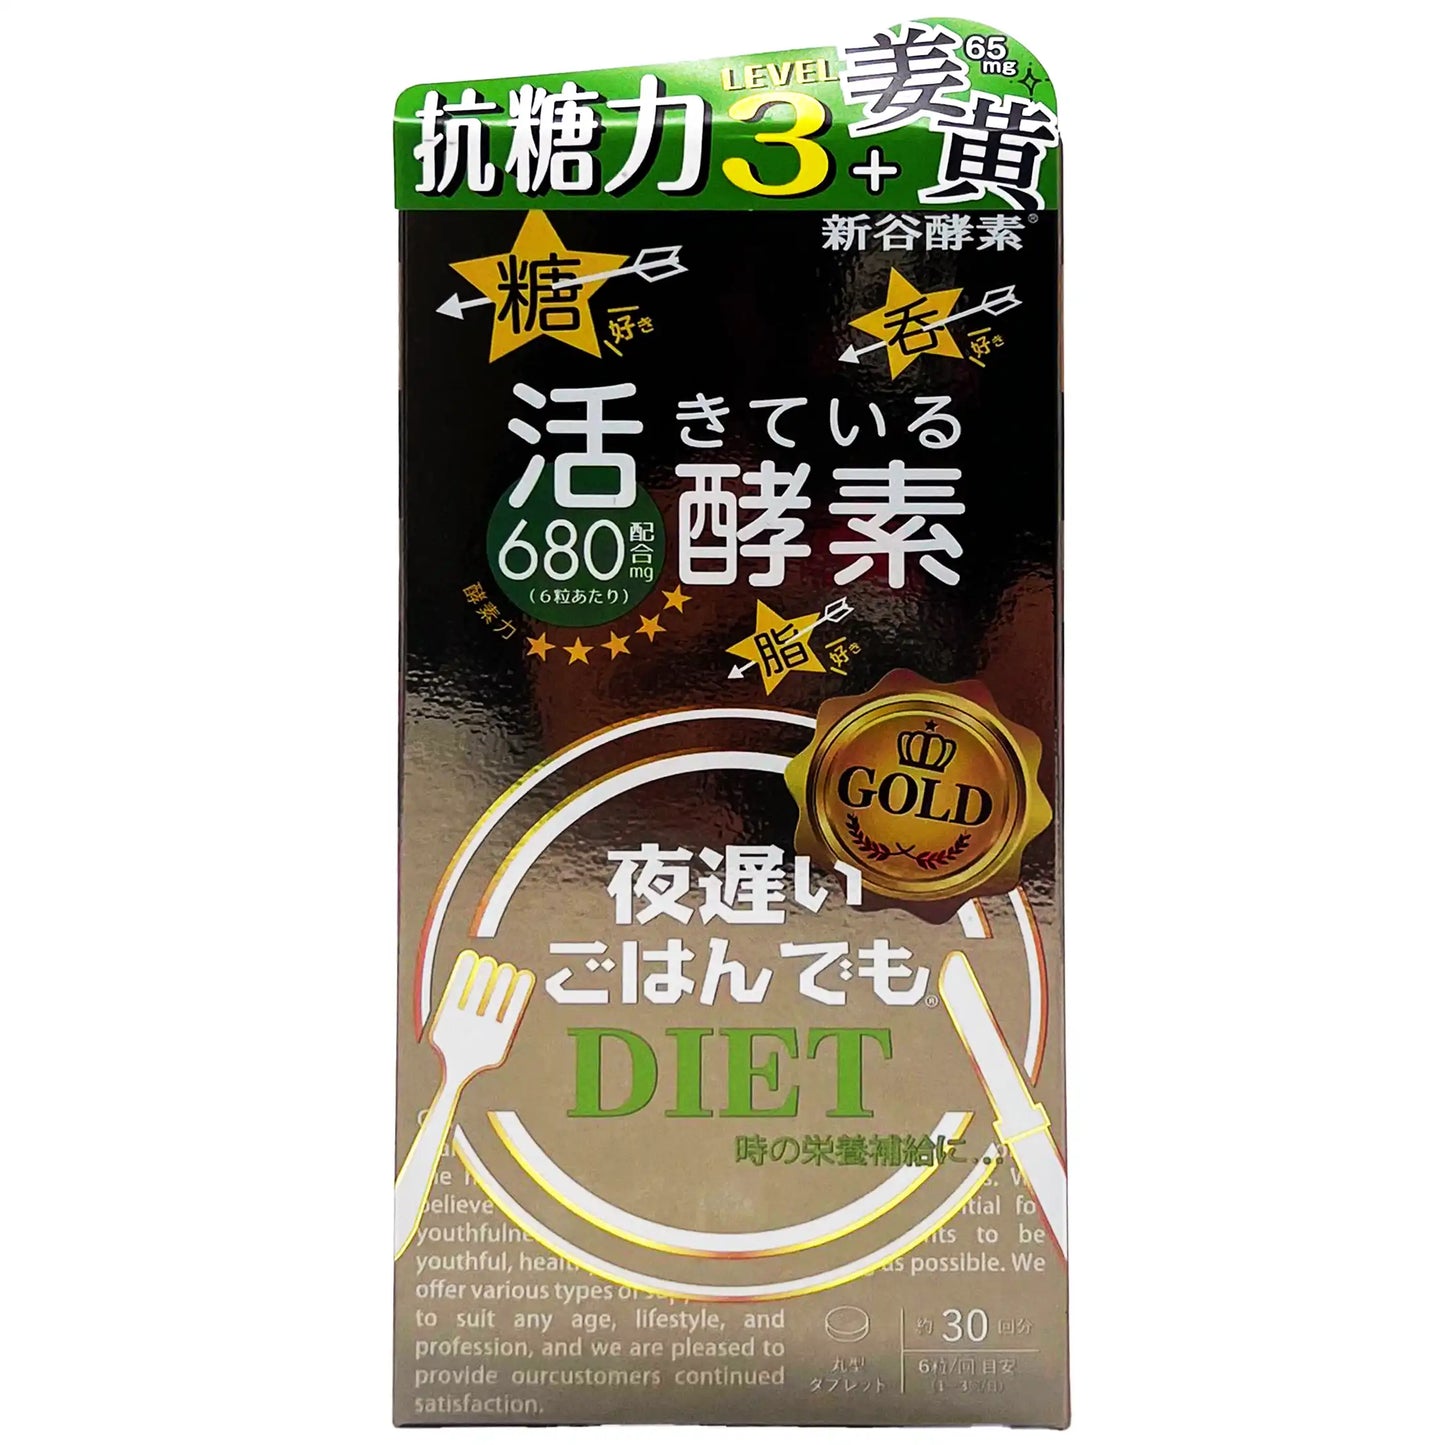 Shinya Koso Late Night Meal Diet Enzymes Gold  30 tablets 1.52 oz